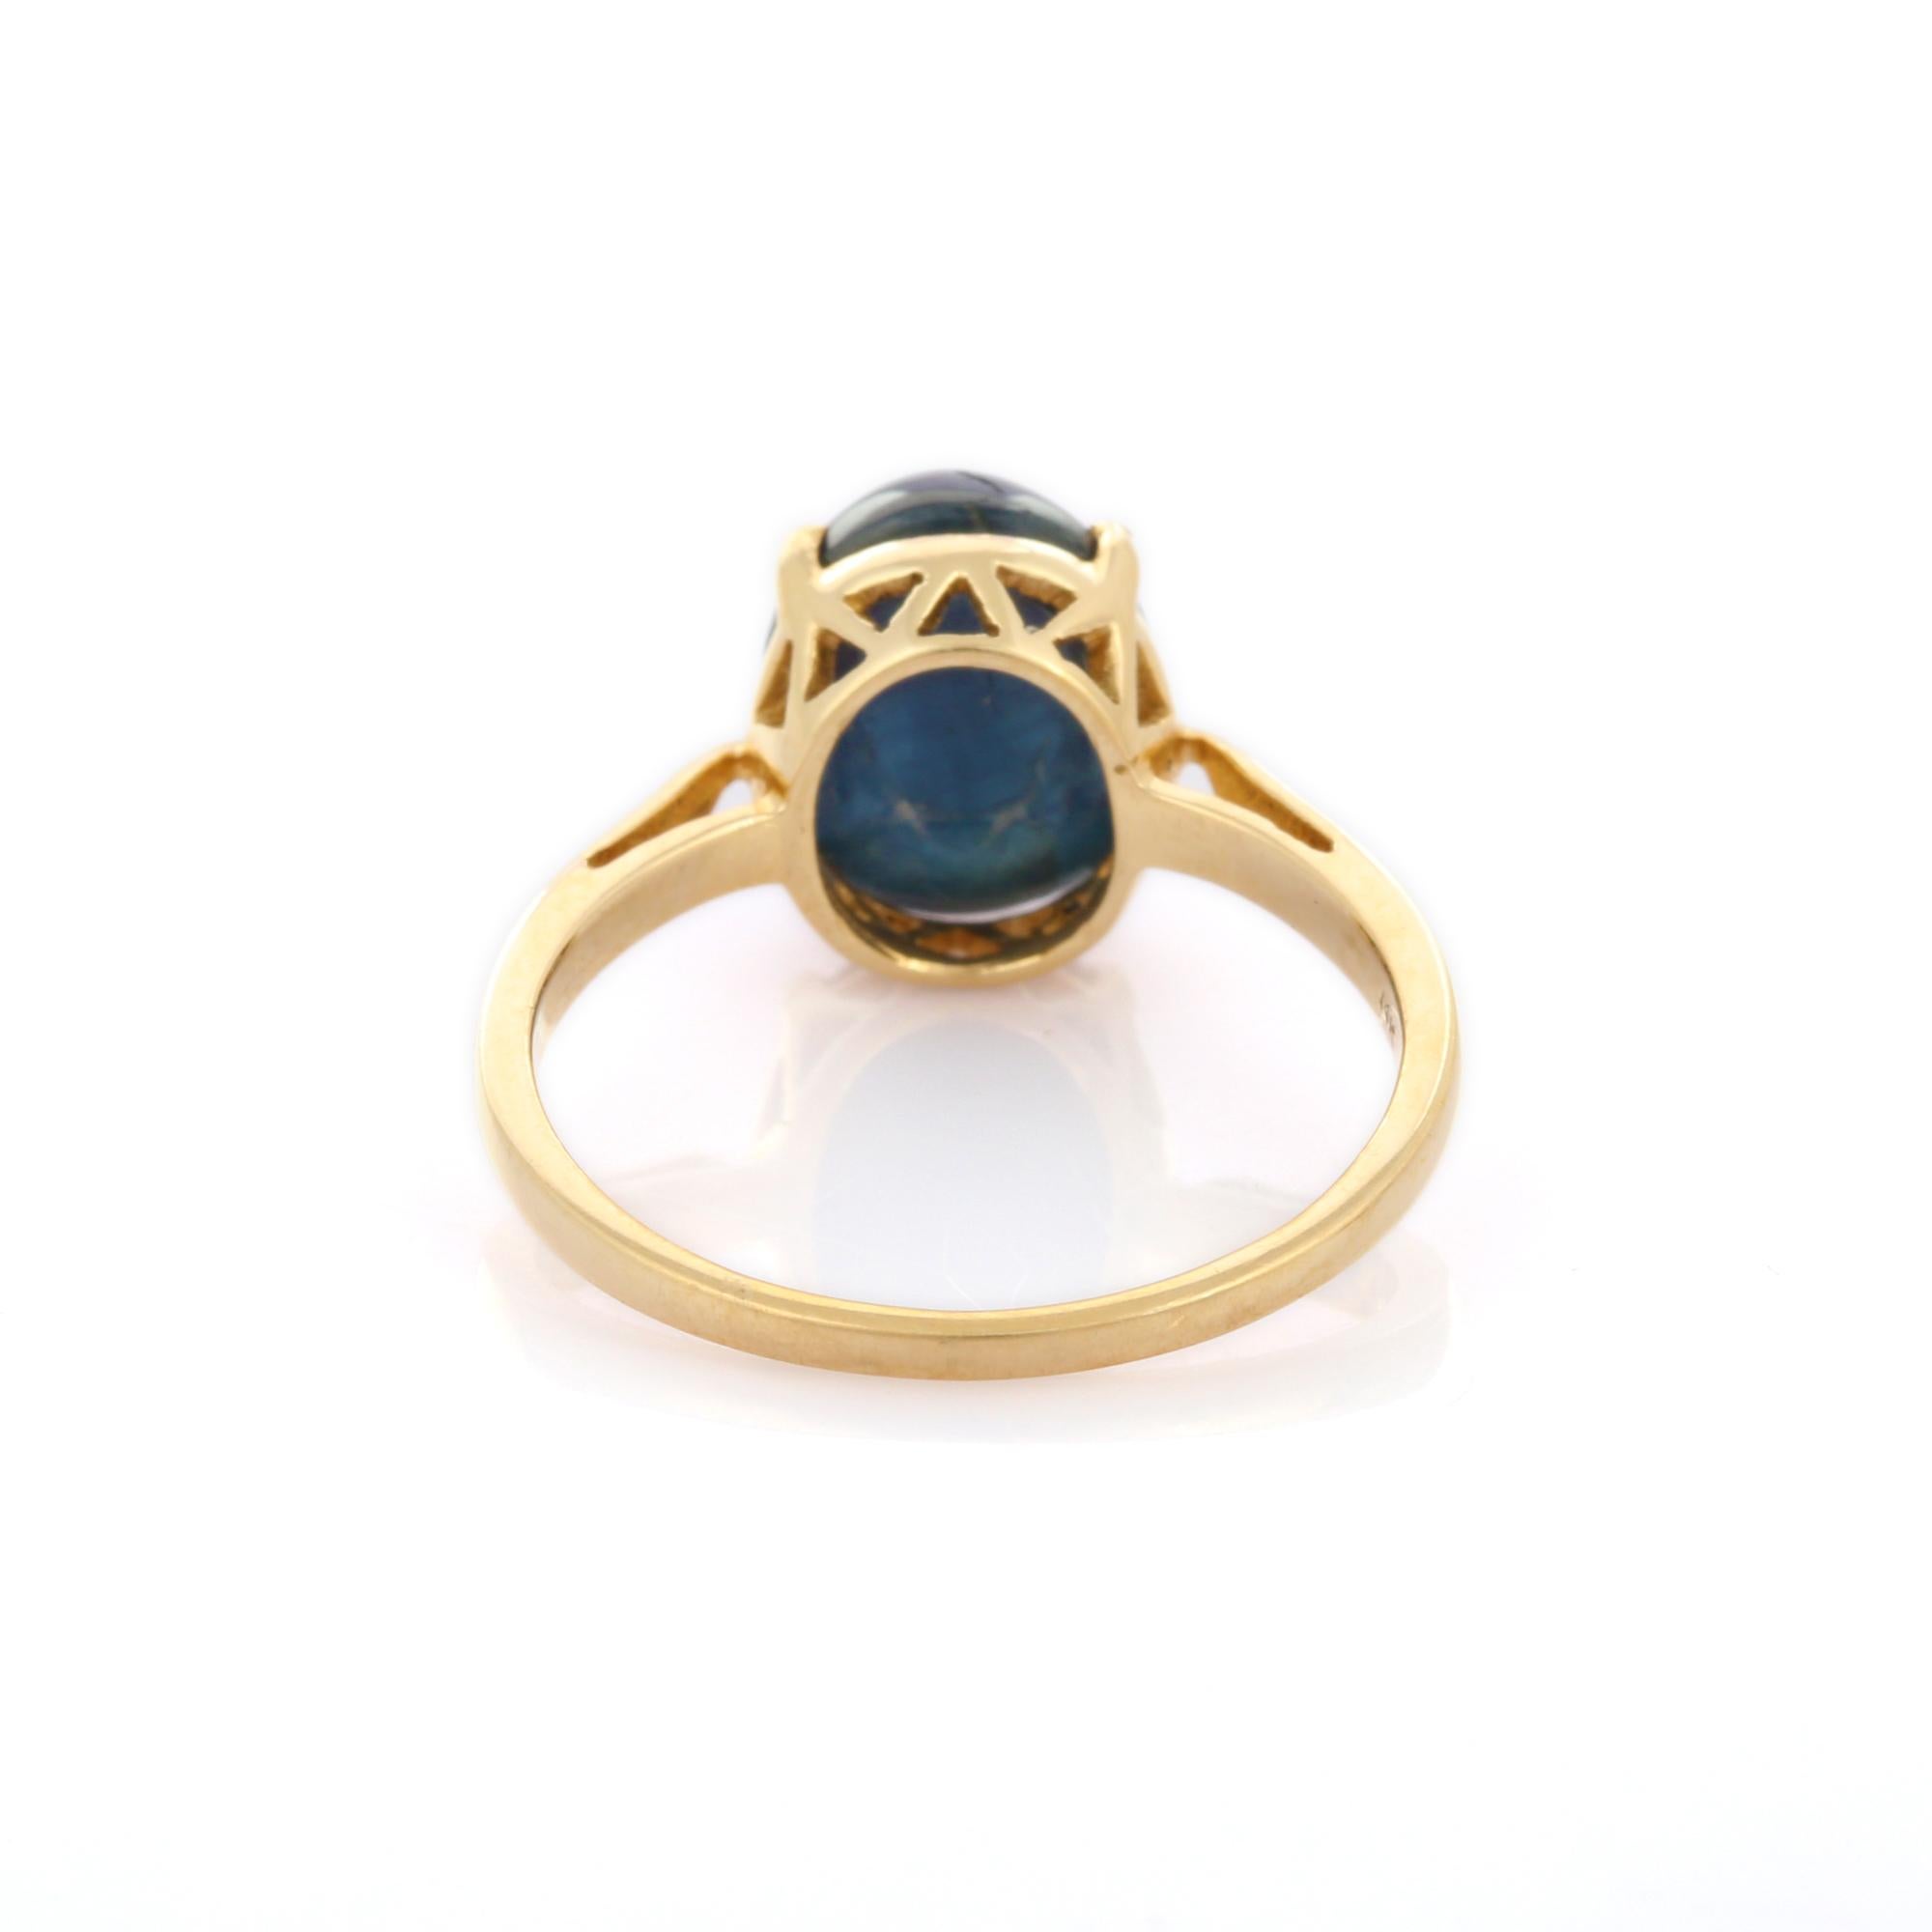 For Sale:  Anglo Indian Style 14K Yellow Gold Blue Sapphire Gemstone Ring 5